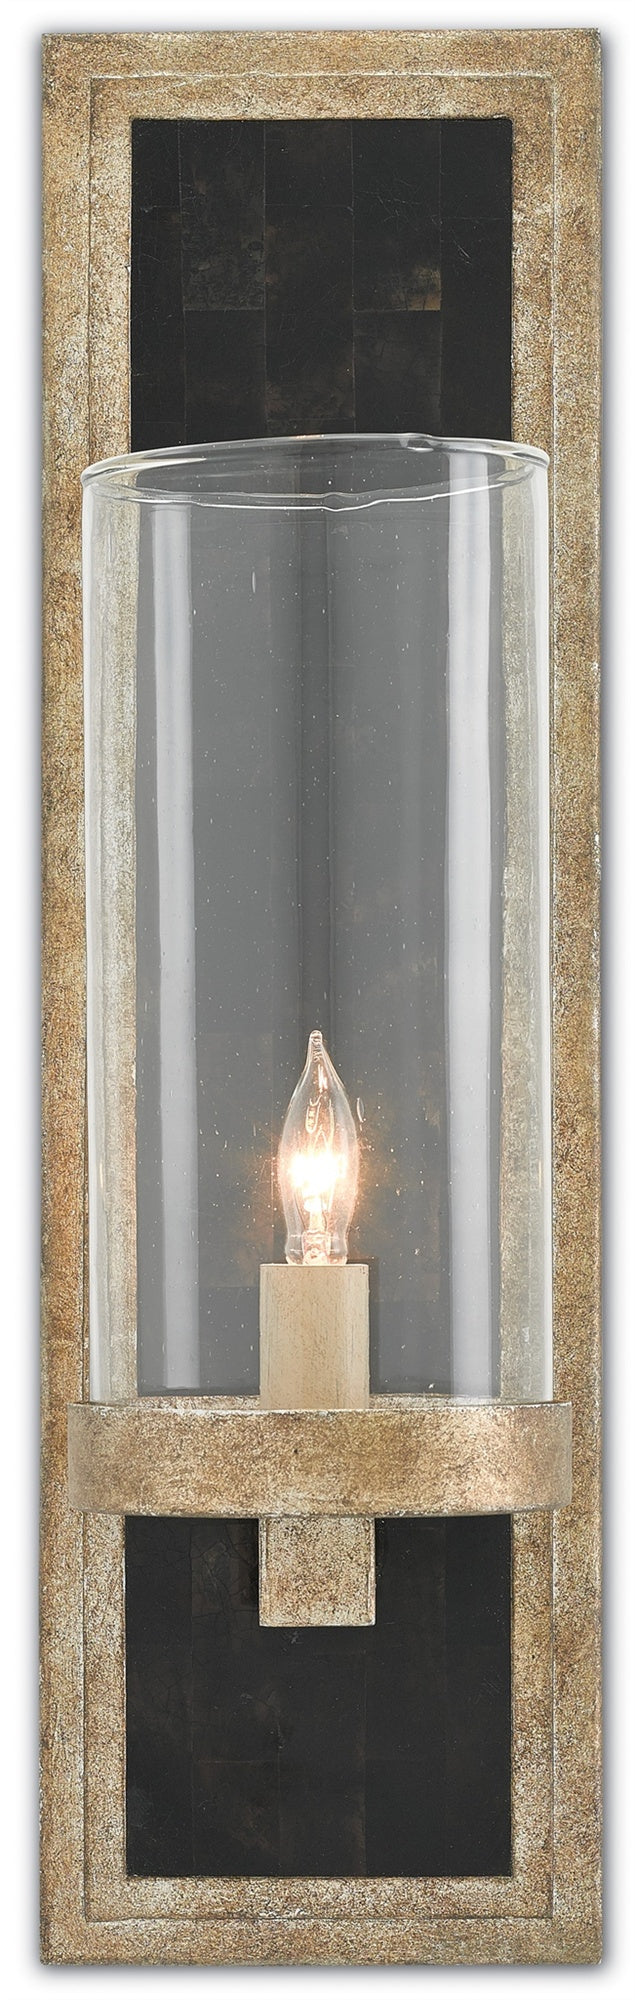 Currey and Company Charade Wall Sconce, Silver 5000-0025